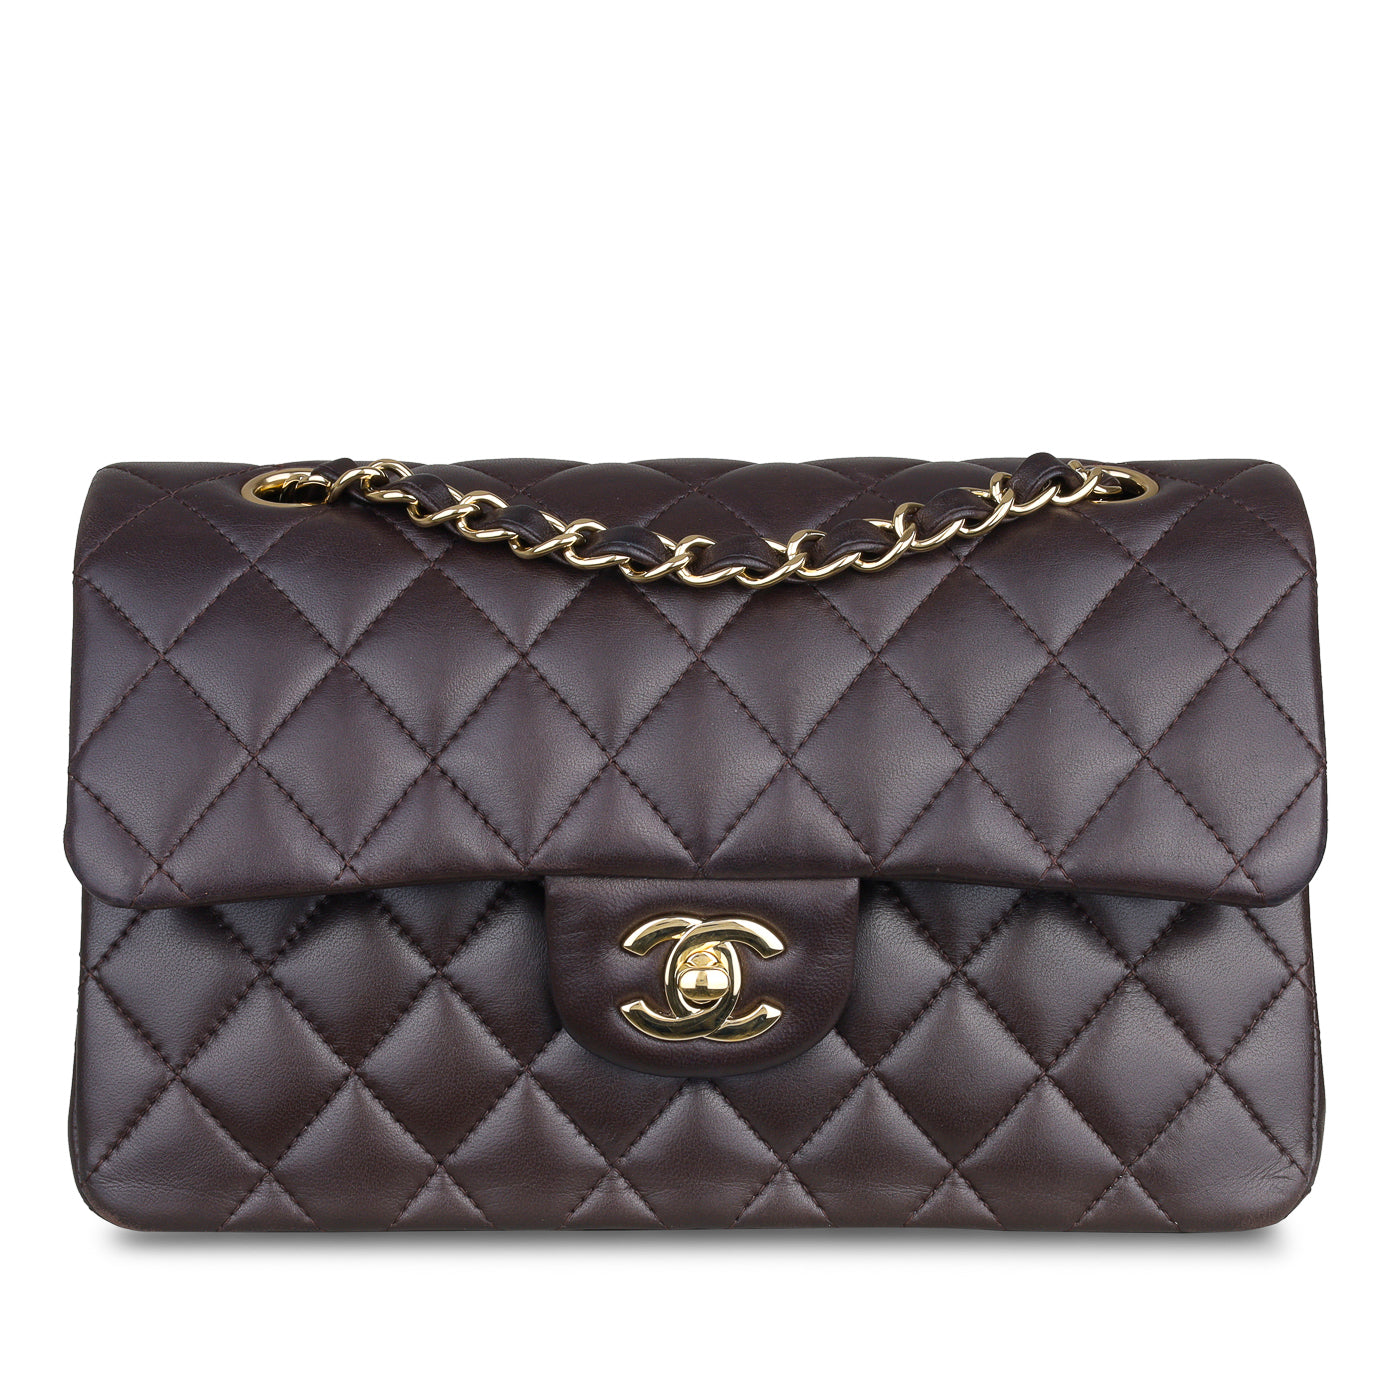 Chanel - Small Classic Flap Bag - Brown Lambskin CGHW - Excellent